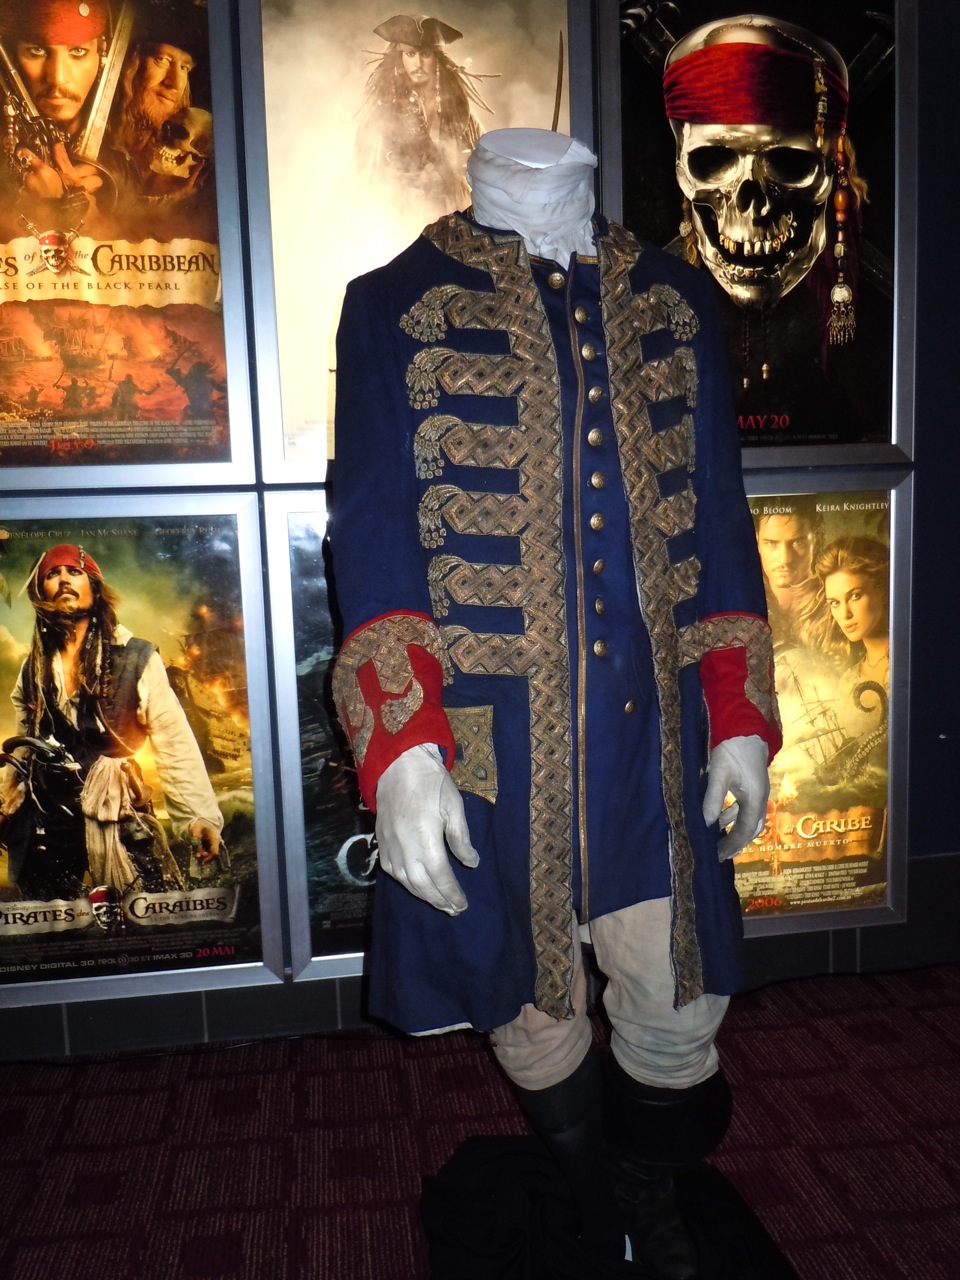 Geoffrey Rush's Captain Barbossa costume from Pirates of the Caribbean...